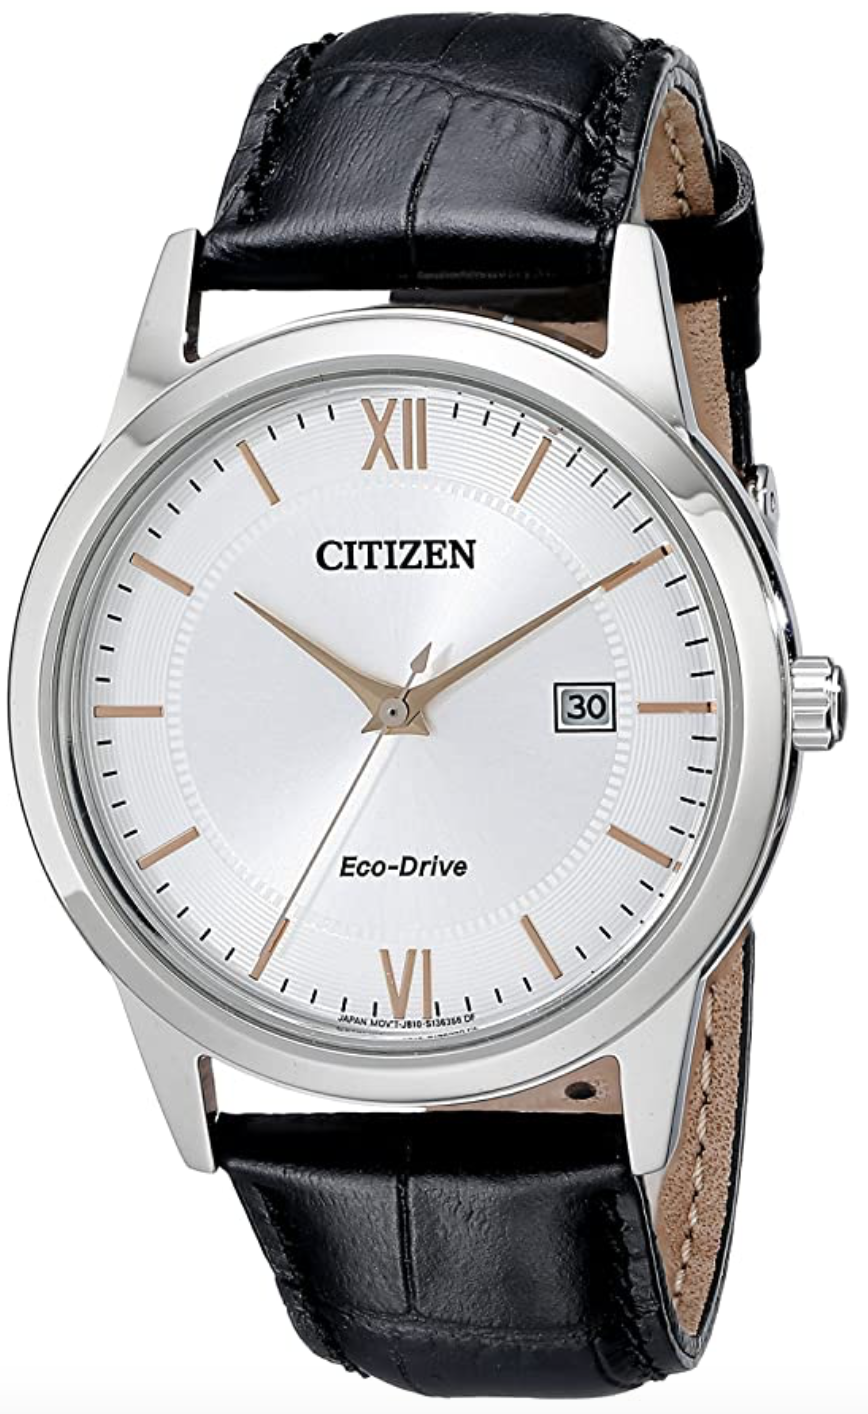 Citizen Men's Eco-Drive Stainless Steel Watch with Date, AW1236-03A